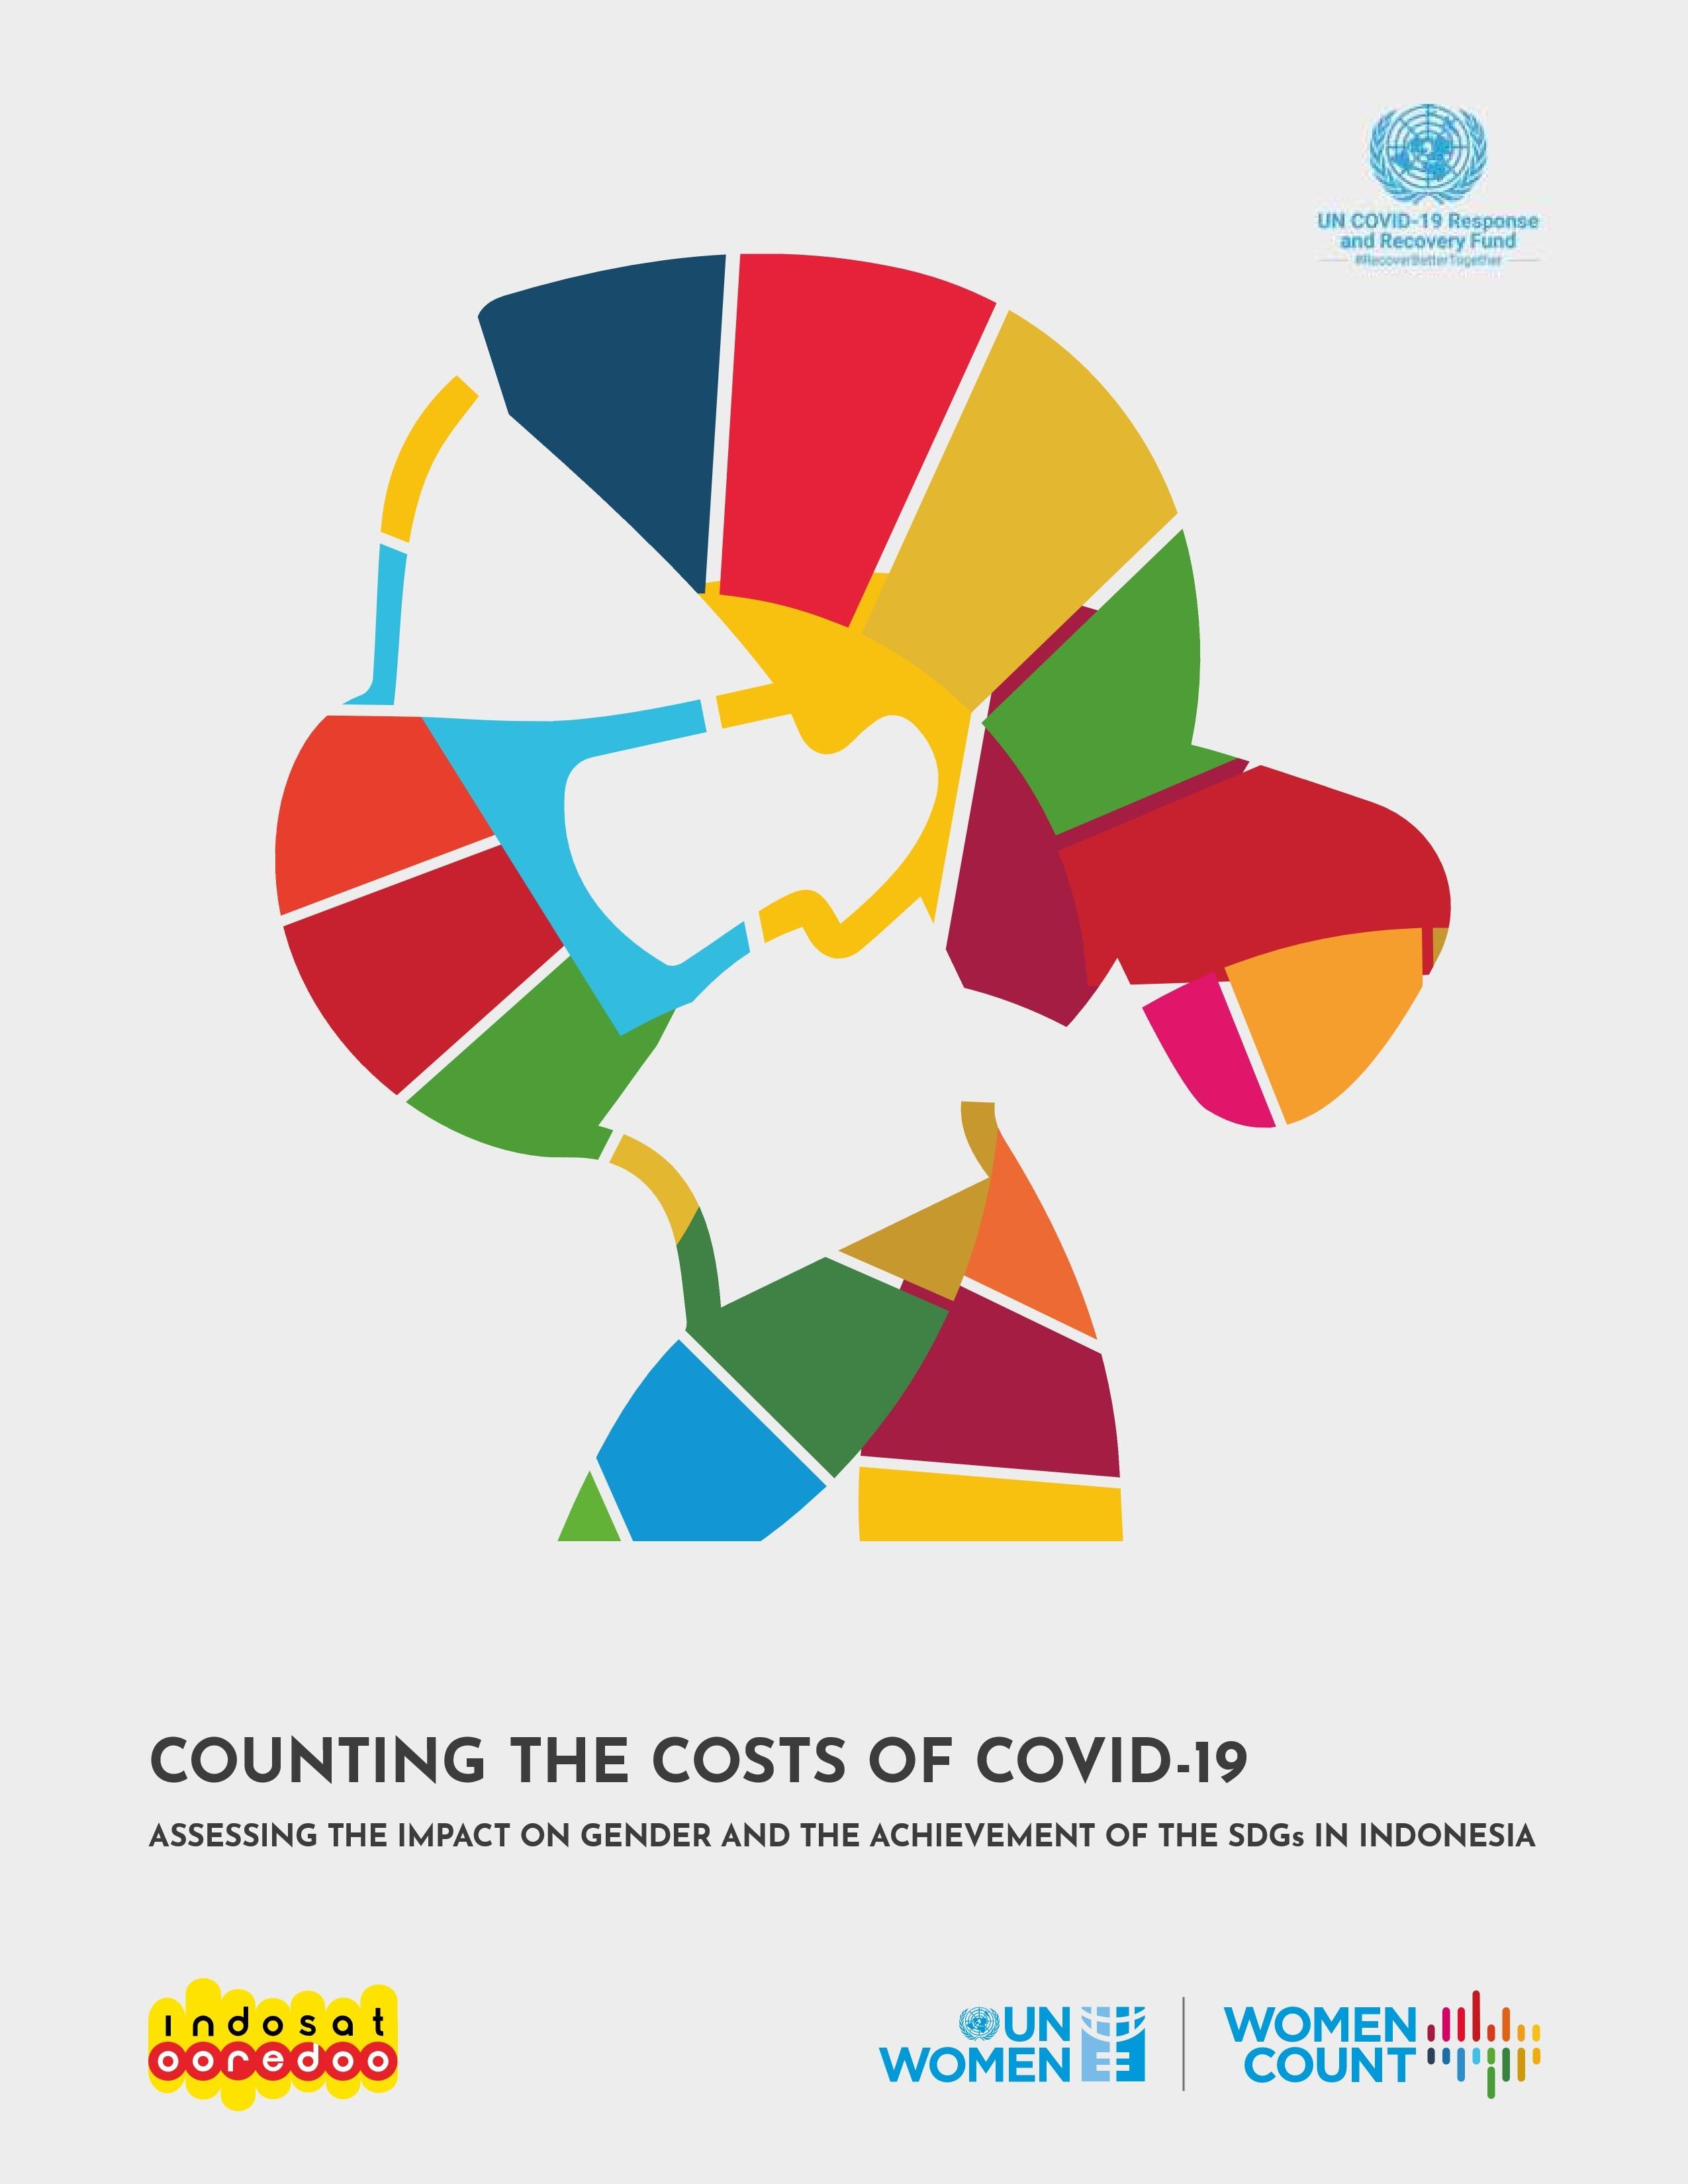 COUNTING THE COSTS OF COVID-19: ASSESSING THE IMPACT ON GENDER AND THE ACHIEVEMENT OF THE SDGs IN INDONESIA